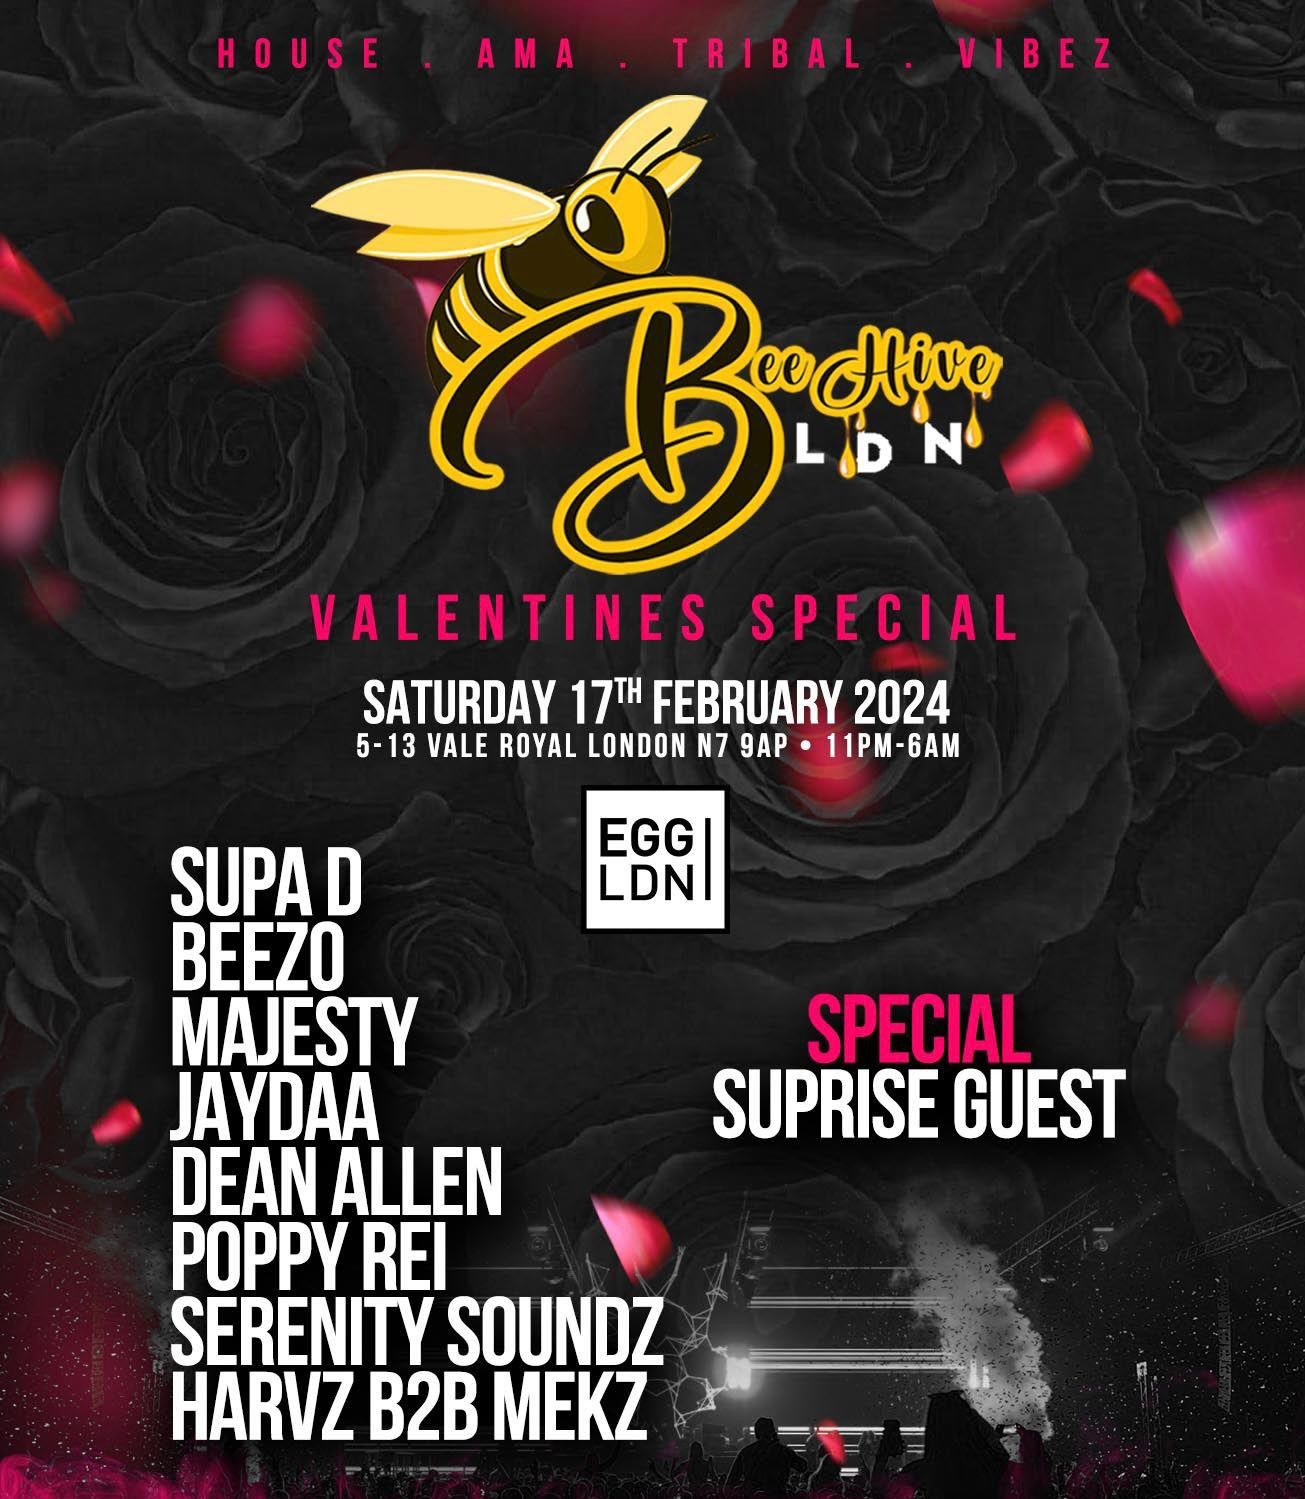 Beehive Ldn Valentines special (The Experience)